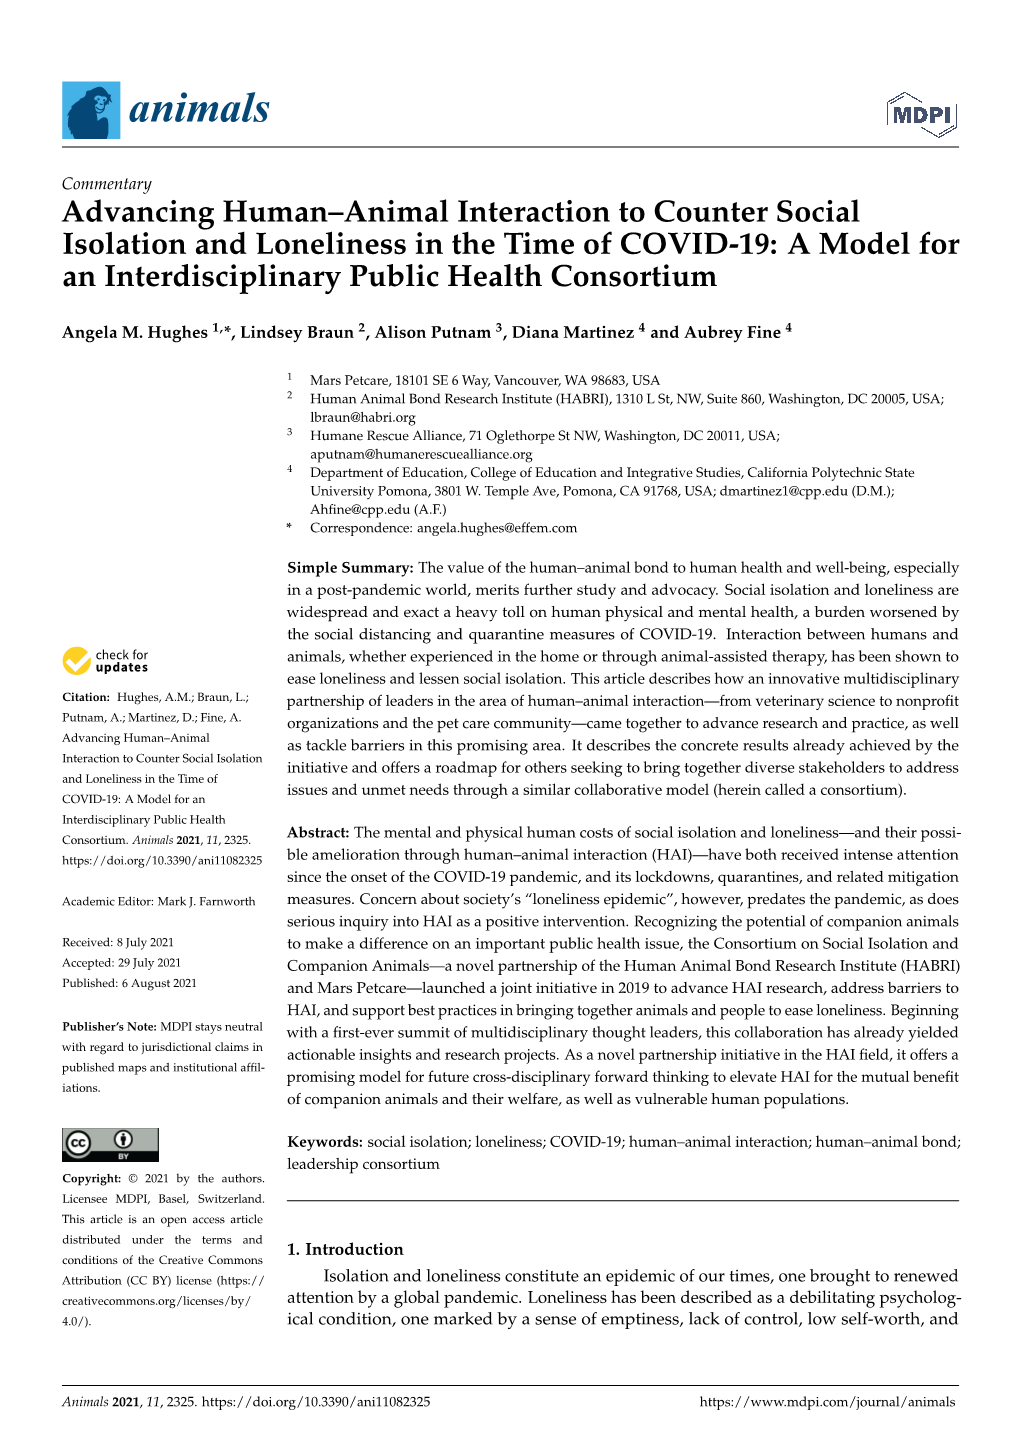 Advancing Human–Animal Interaction to Counter Social Isolation and Loneliness in the Time of COVID-19: a Model for an Interdisciplinary Public Health Consortium